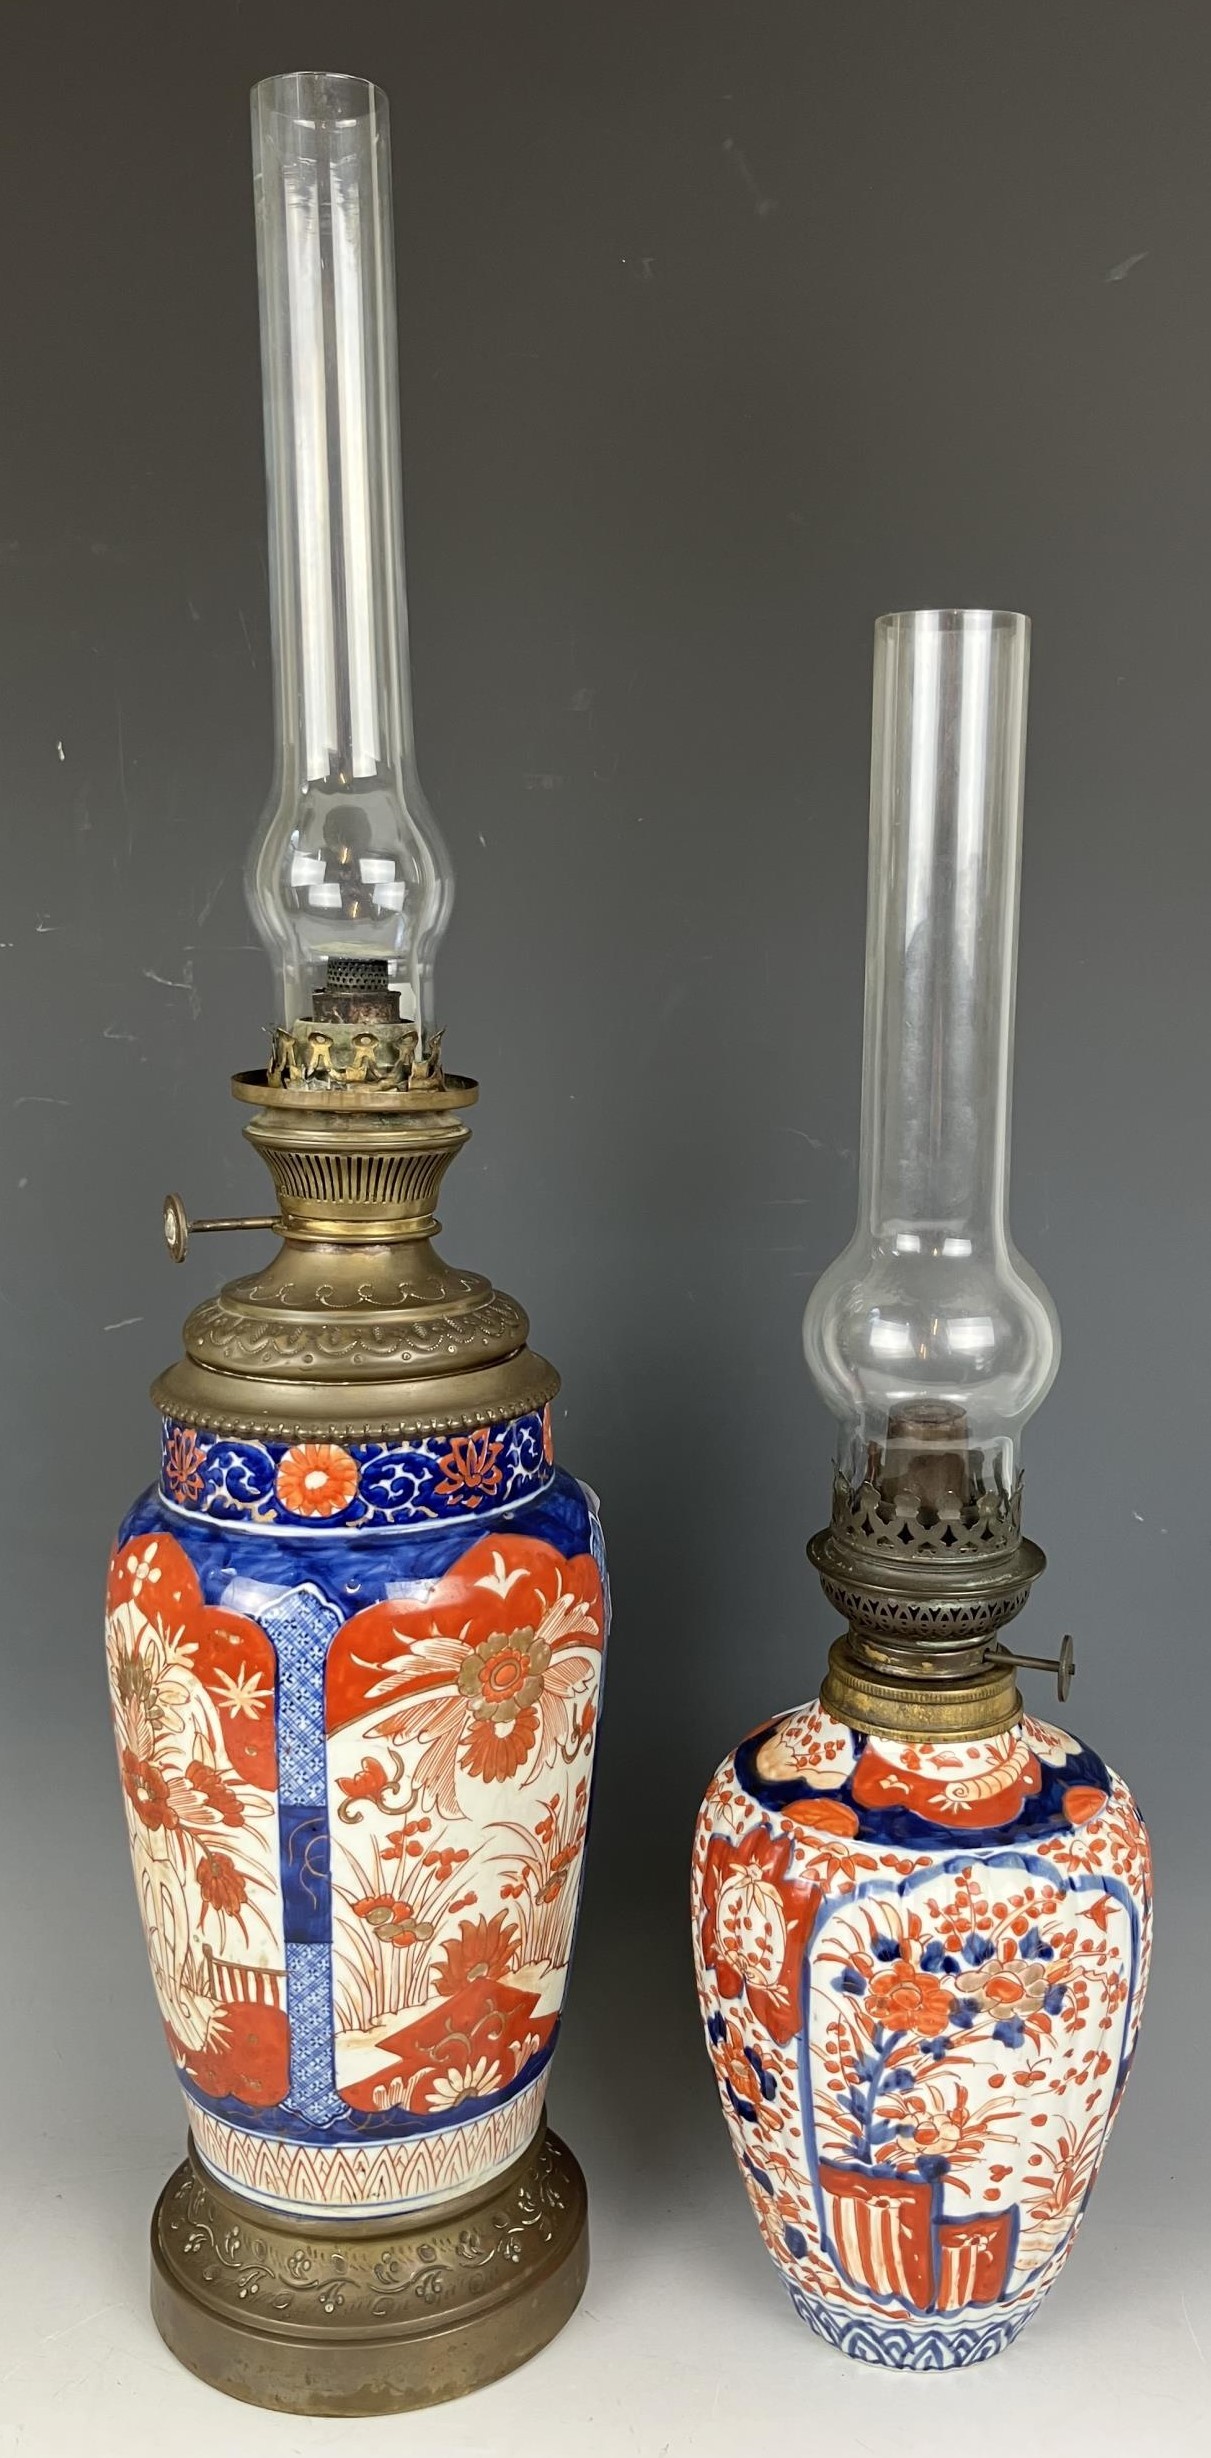 A Japanese Imari vase, converted to an oil lamp, with an acid etched glass shade, 46 cm high, and - Image 5 of 6